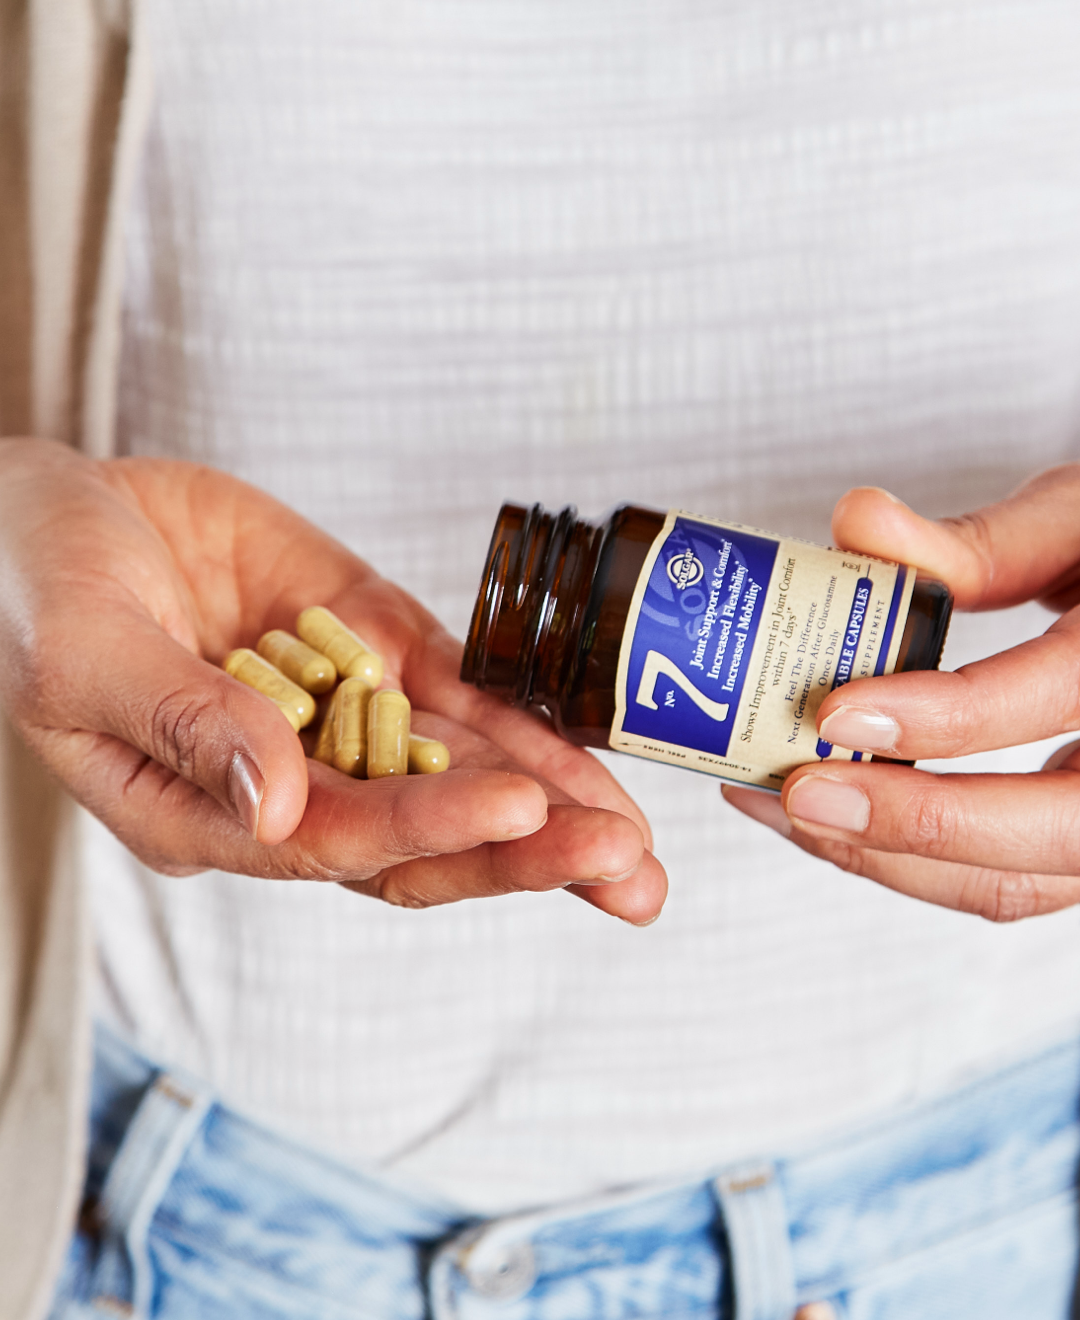 Torso shot of person with left hand holding Solgar number seven supplement pouring out capsules into right hand